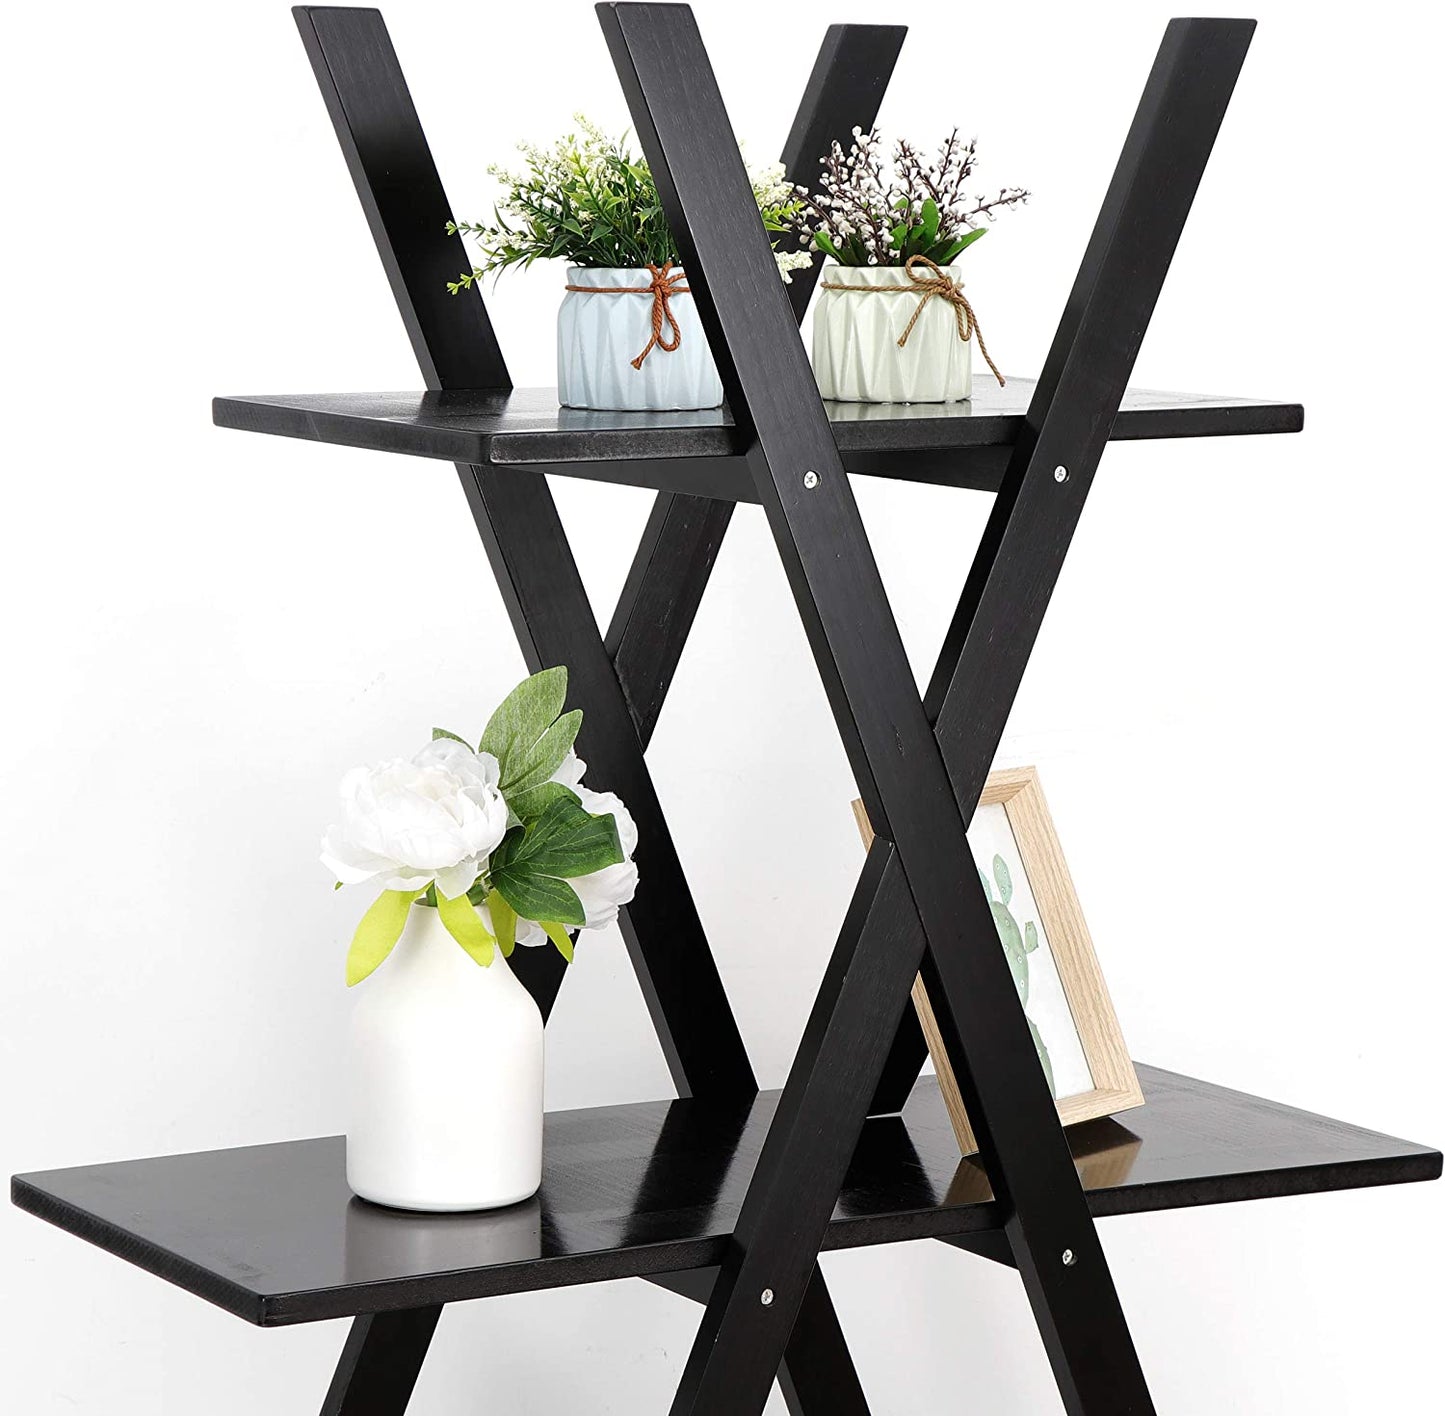 4-Tier Bookshelf A Frame Bookcase, Home and Office Organizer, Storage and Display Rack